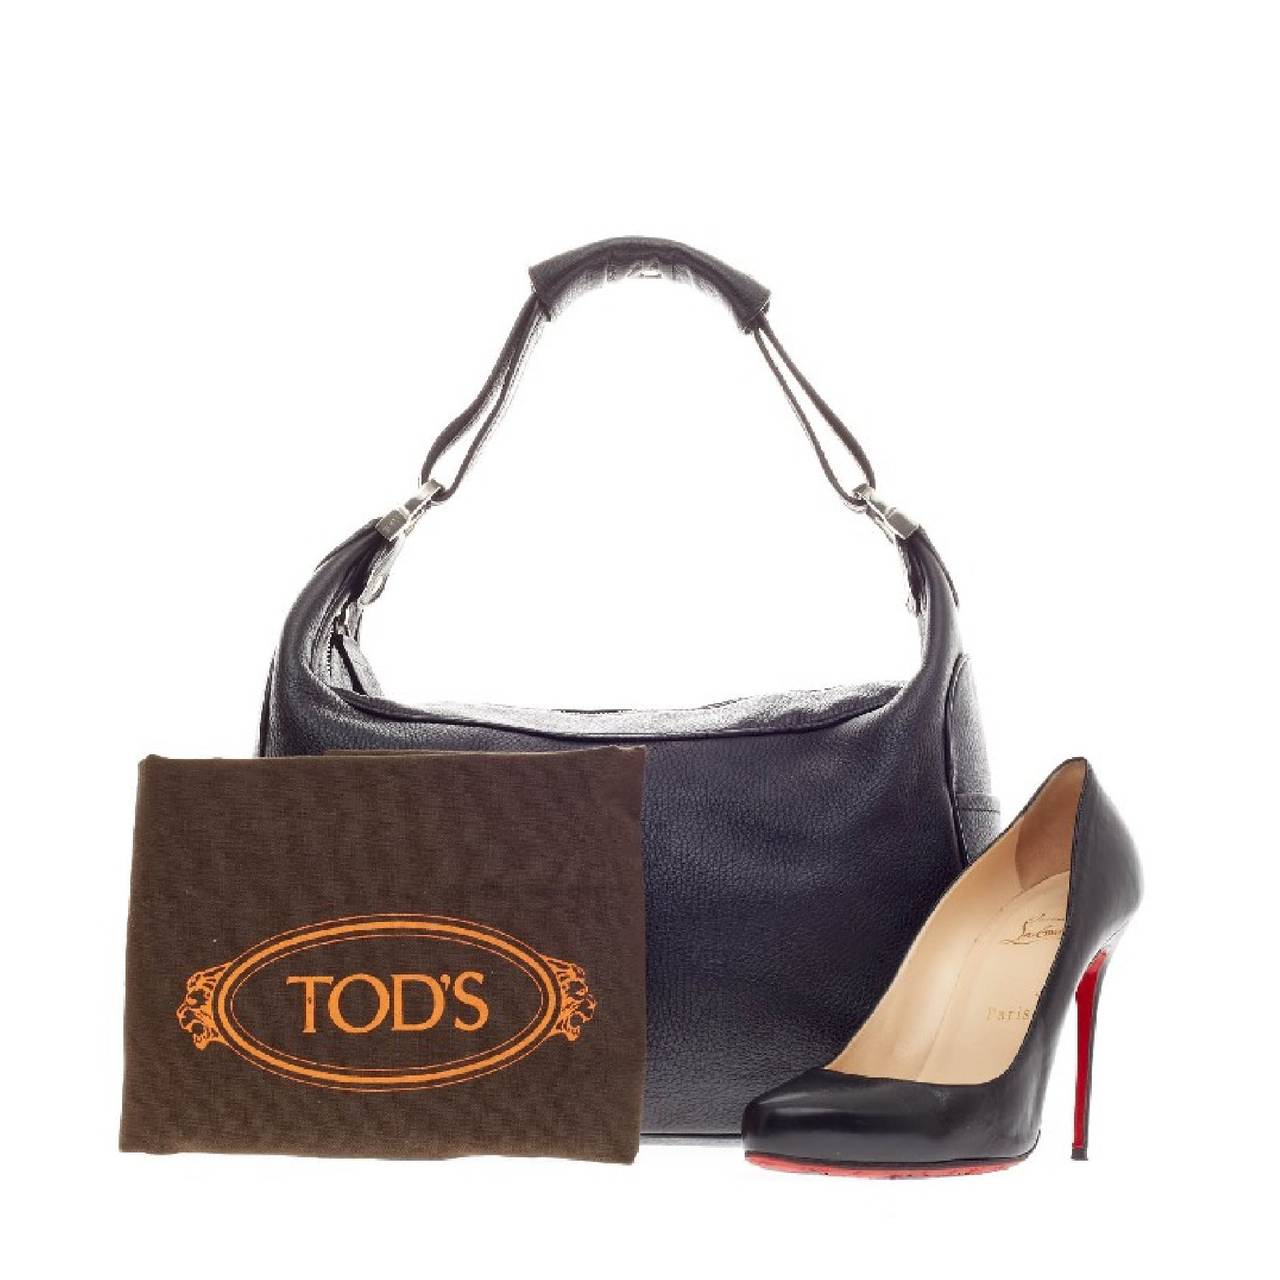 This authentic Tod's Zip Shoulder Bag Leather is perfect for everyday use. Constructed from black leather, this bag features single shoulder strap with pad, exterior side pockets with embossed Tod's logo and silver hardware accents. Its top zipped